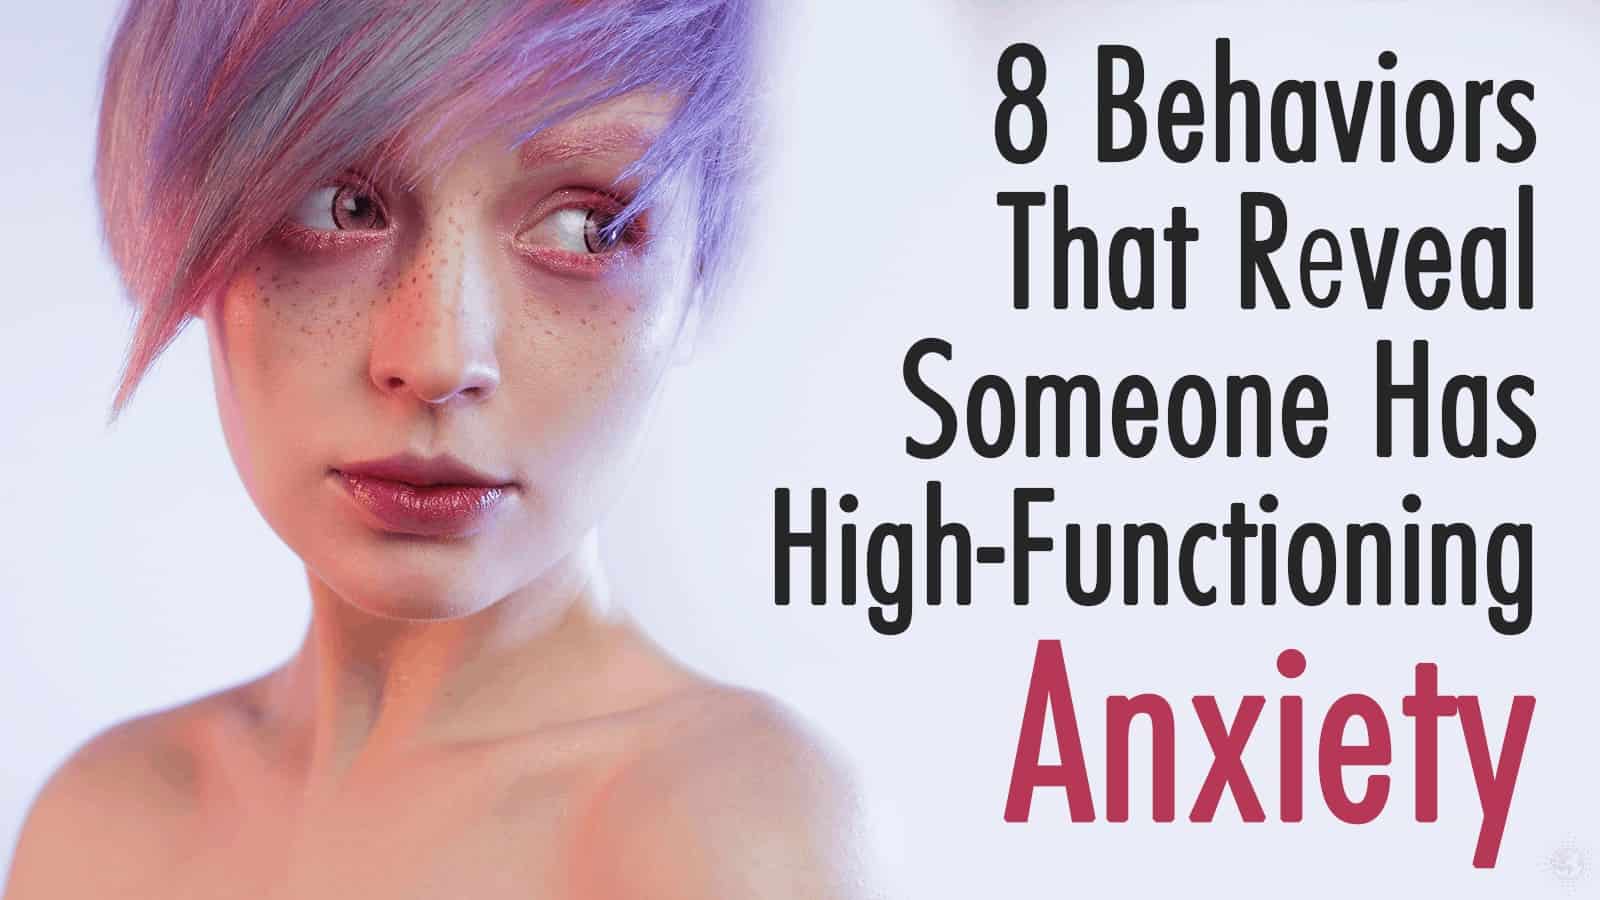 high-functioning anxiety